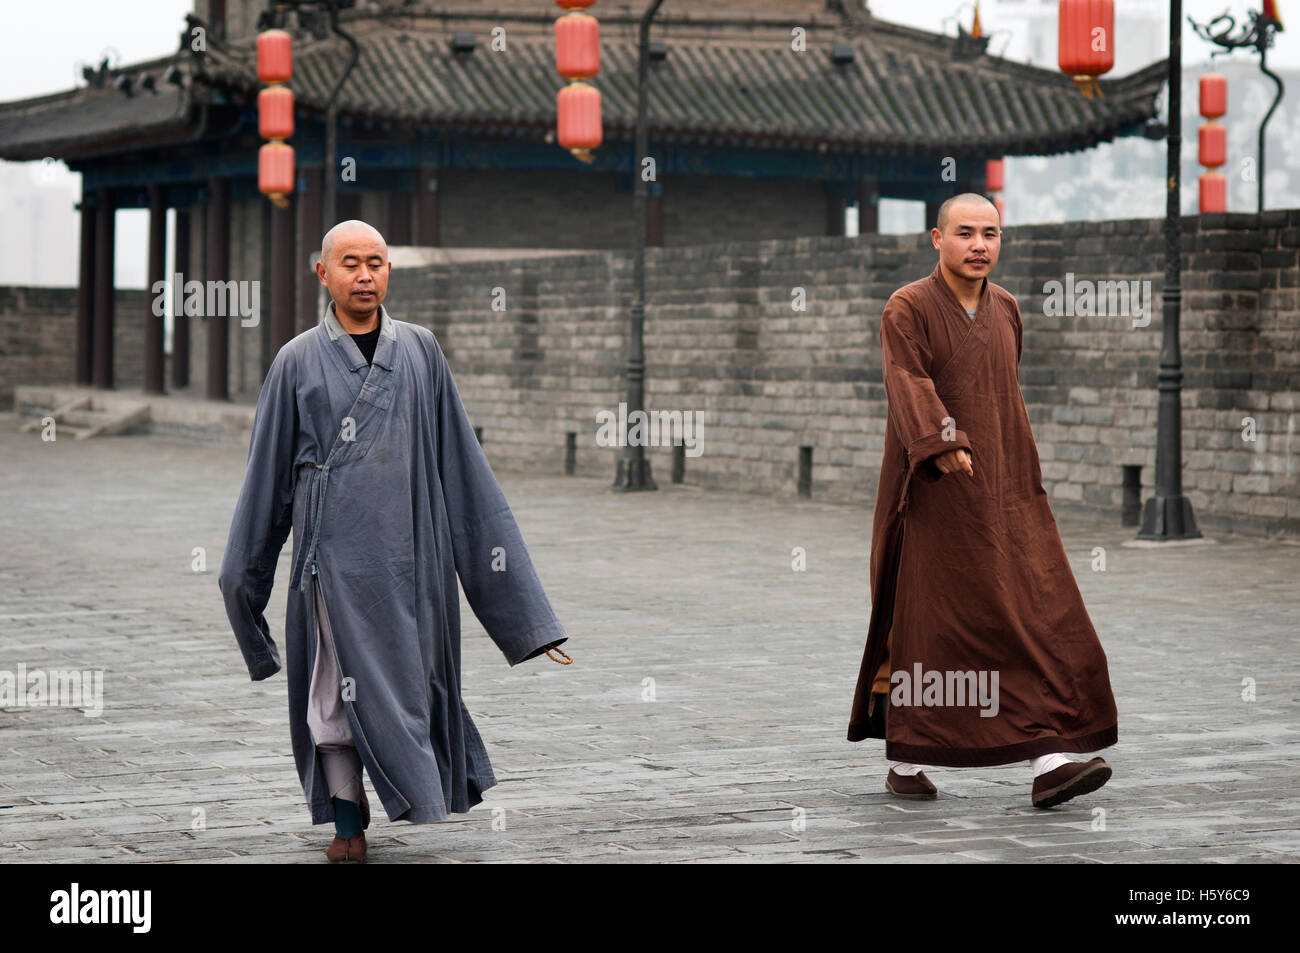 Monks walking in the ancient Xian City Wall Gate and Tower, Shaanxi, China Stock Photo